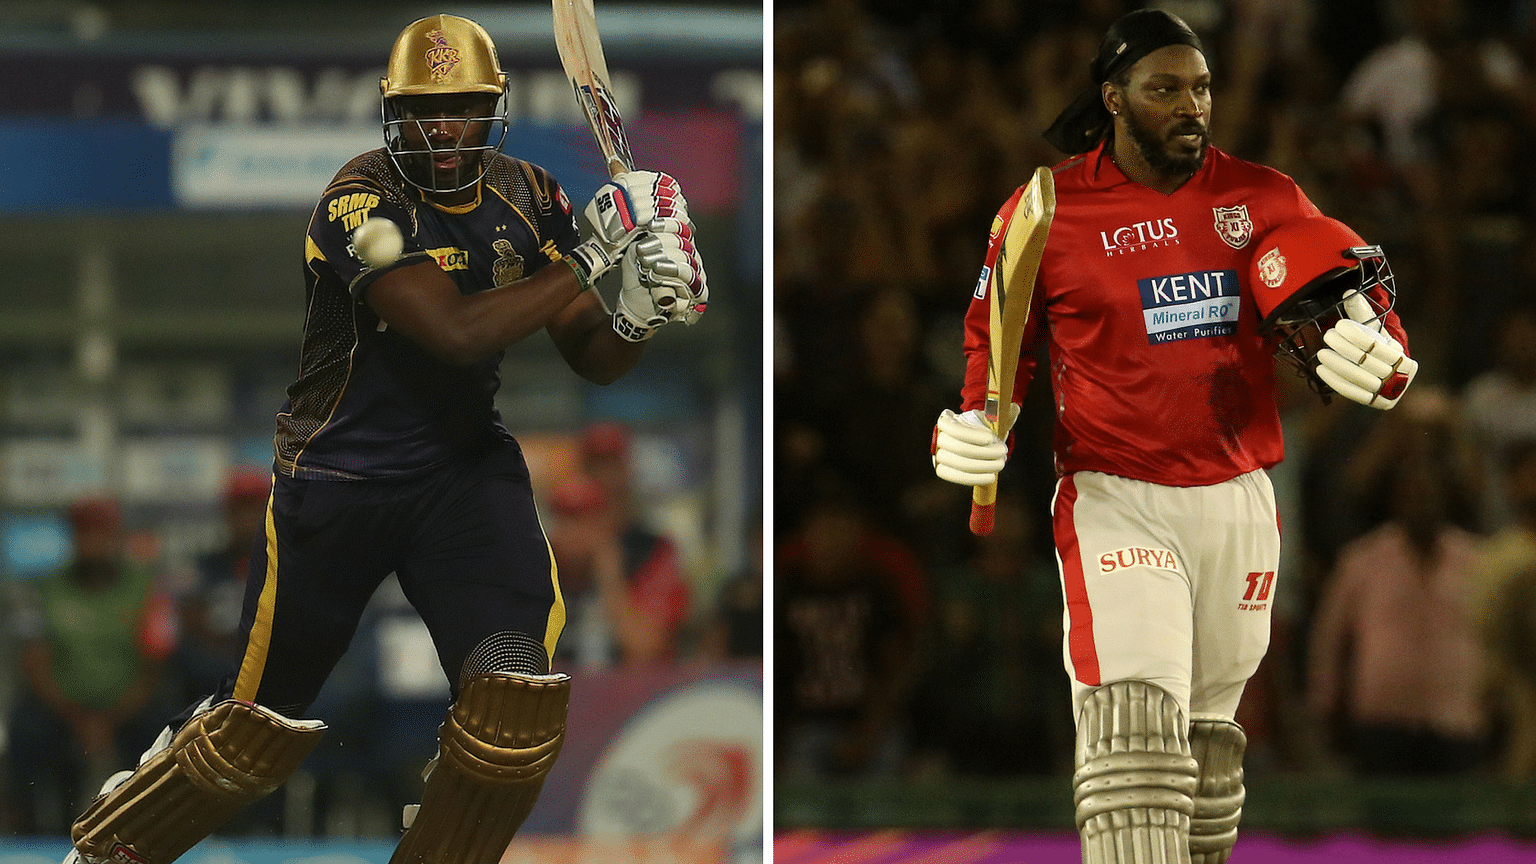 The likes of Andre Russell, Chris Gayle, Kieron Pollard have been at the centre of IPL 2019 talk.